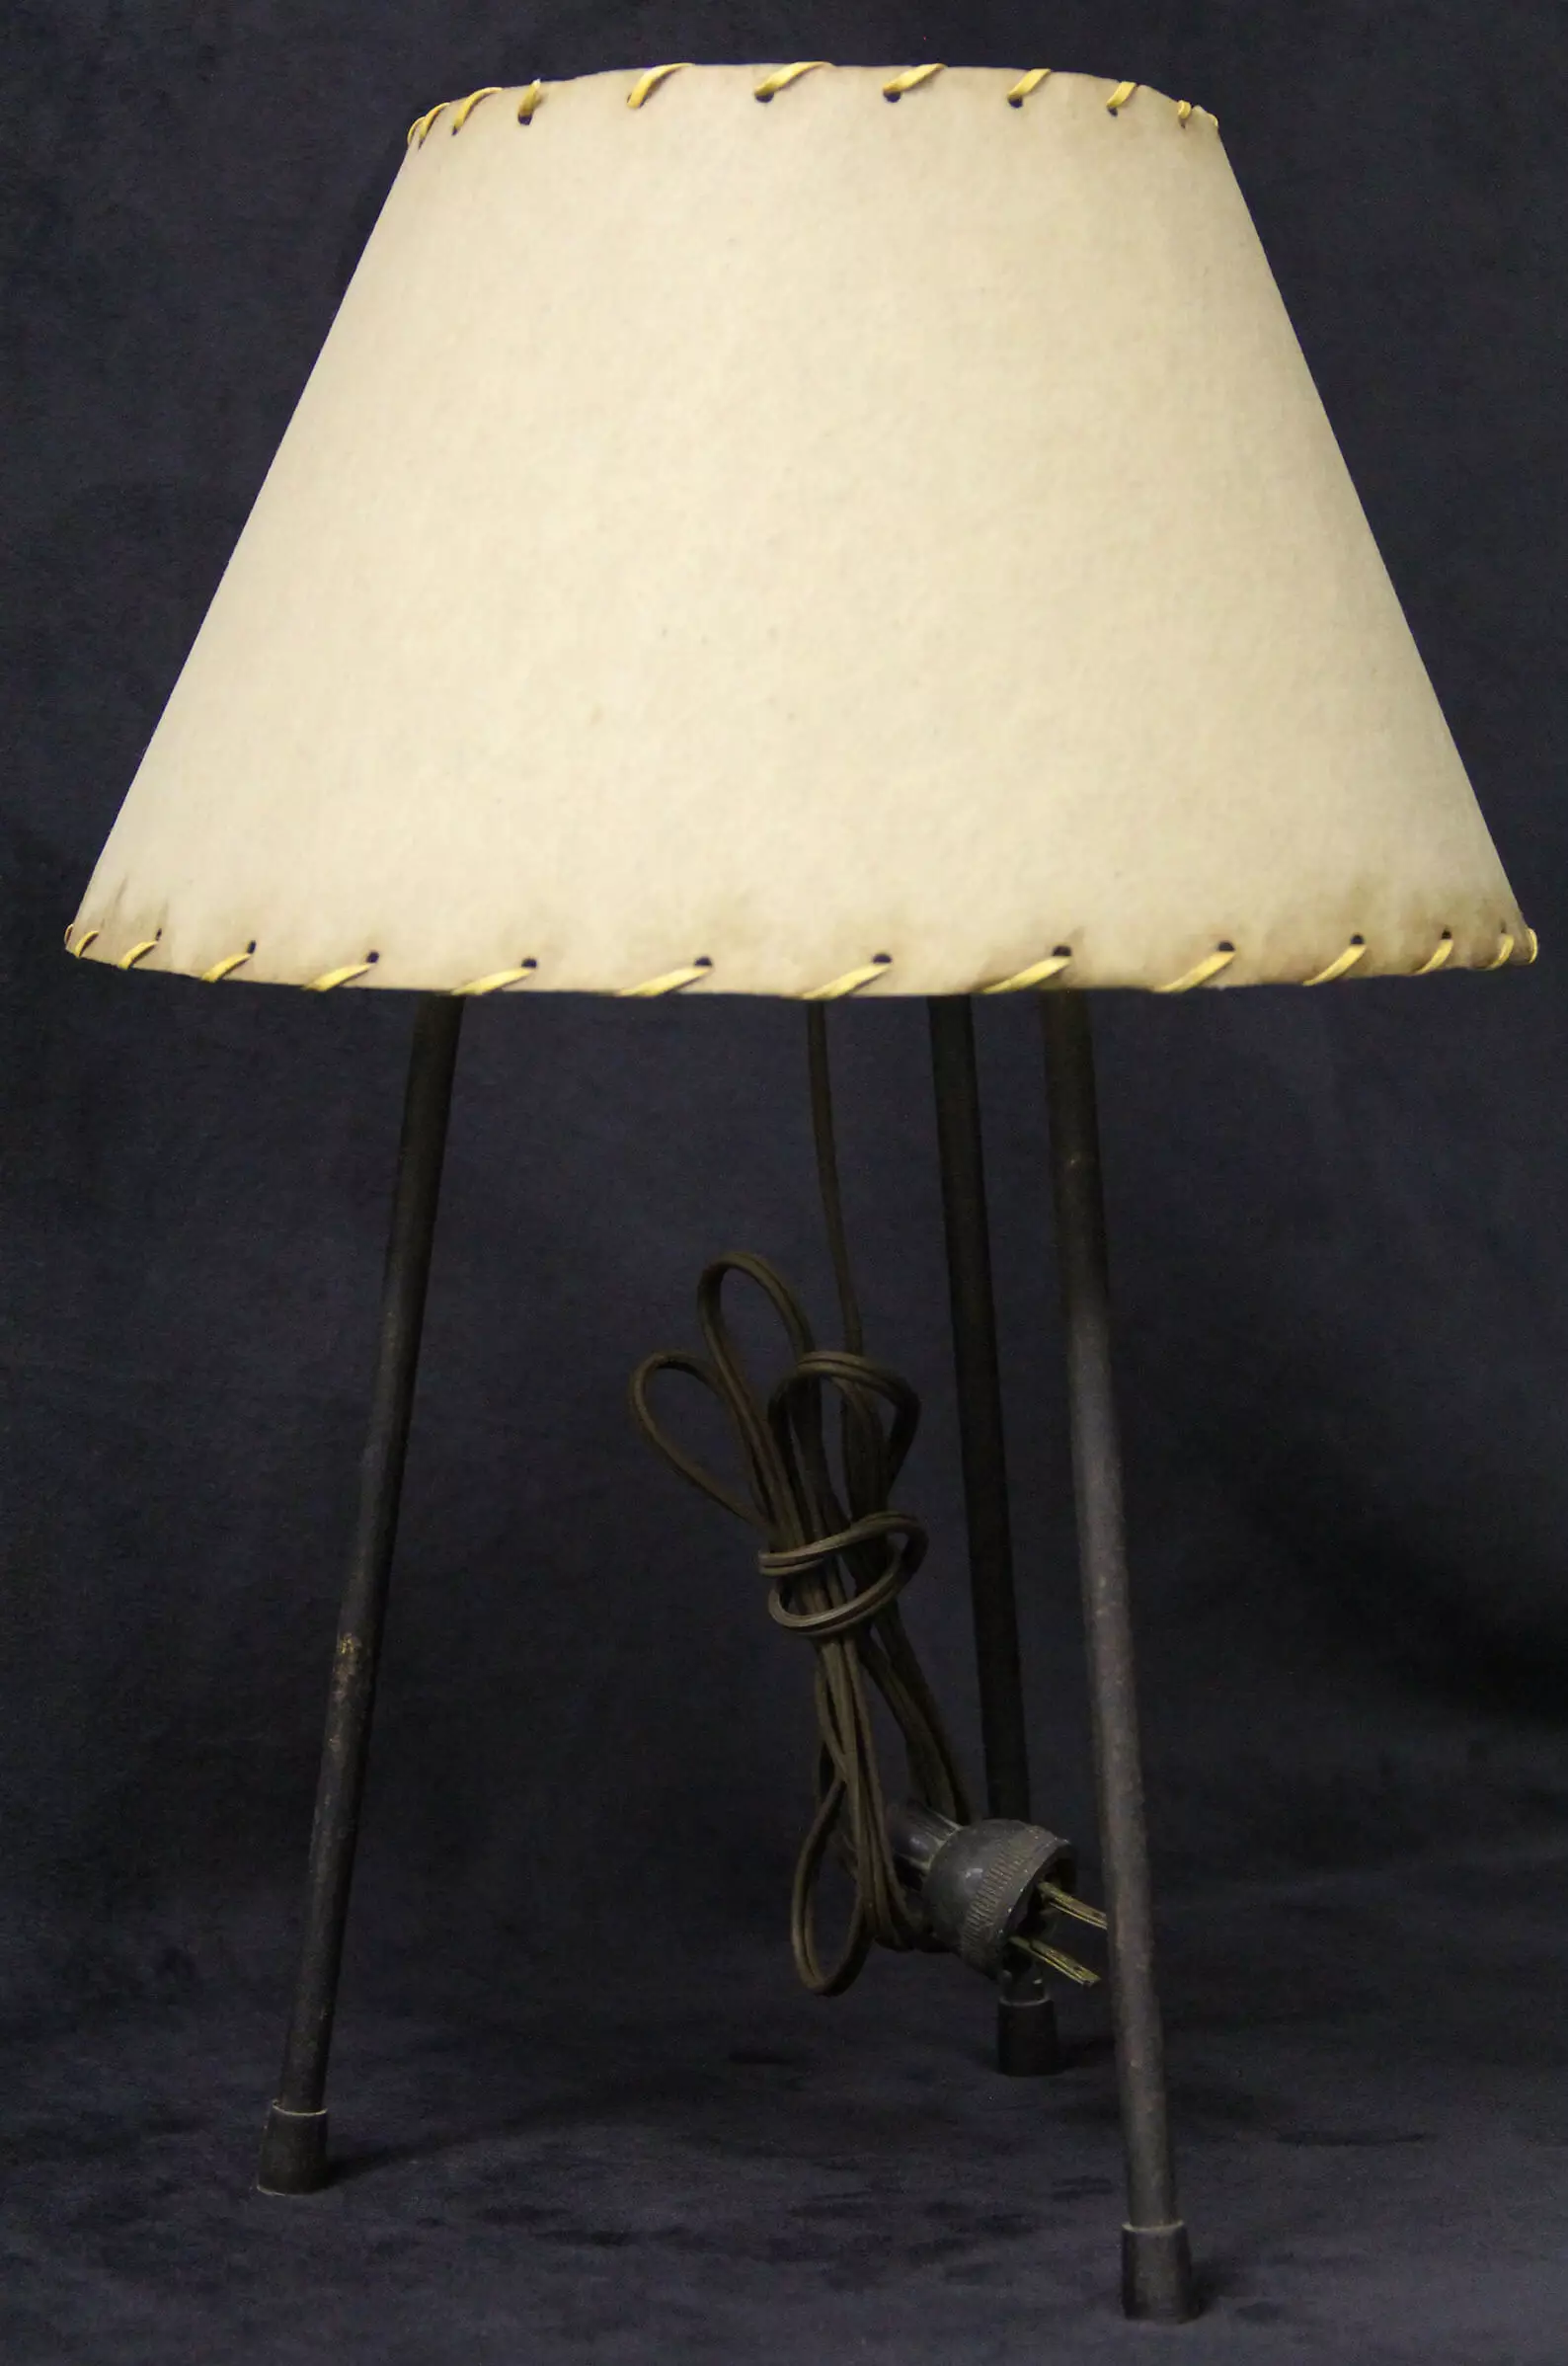 Photo of a lamp with 3 dark legs, a cord, and a white lampshade that has a thin leather strip weaved around both the top and bottom of the shade.